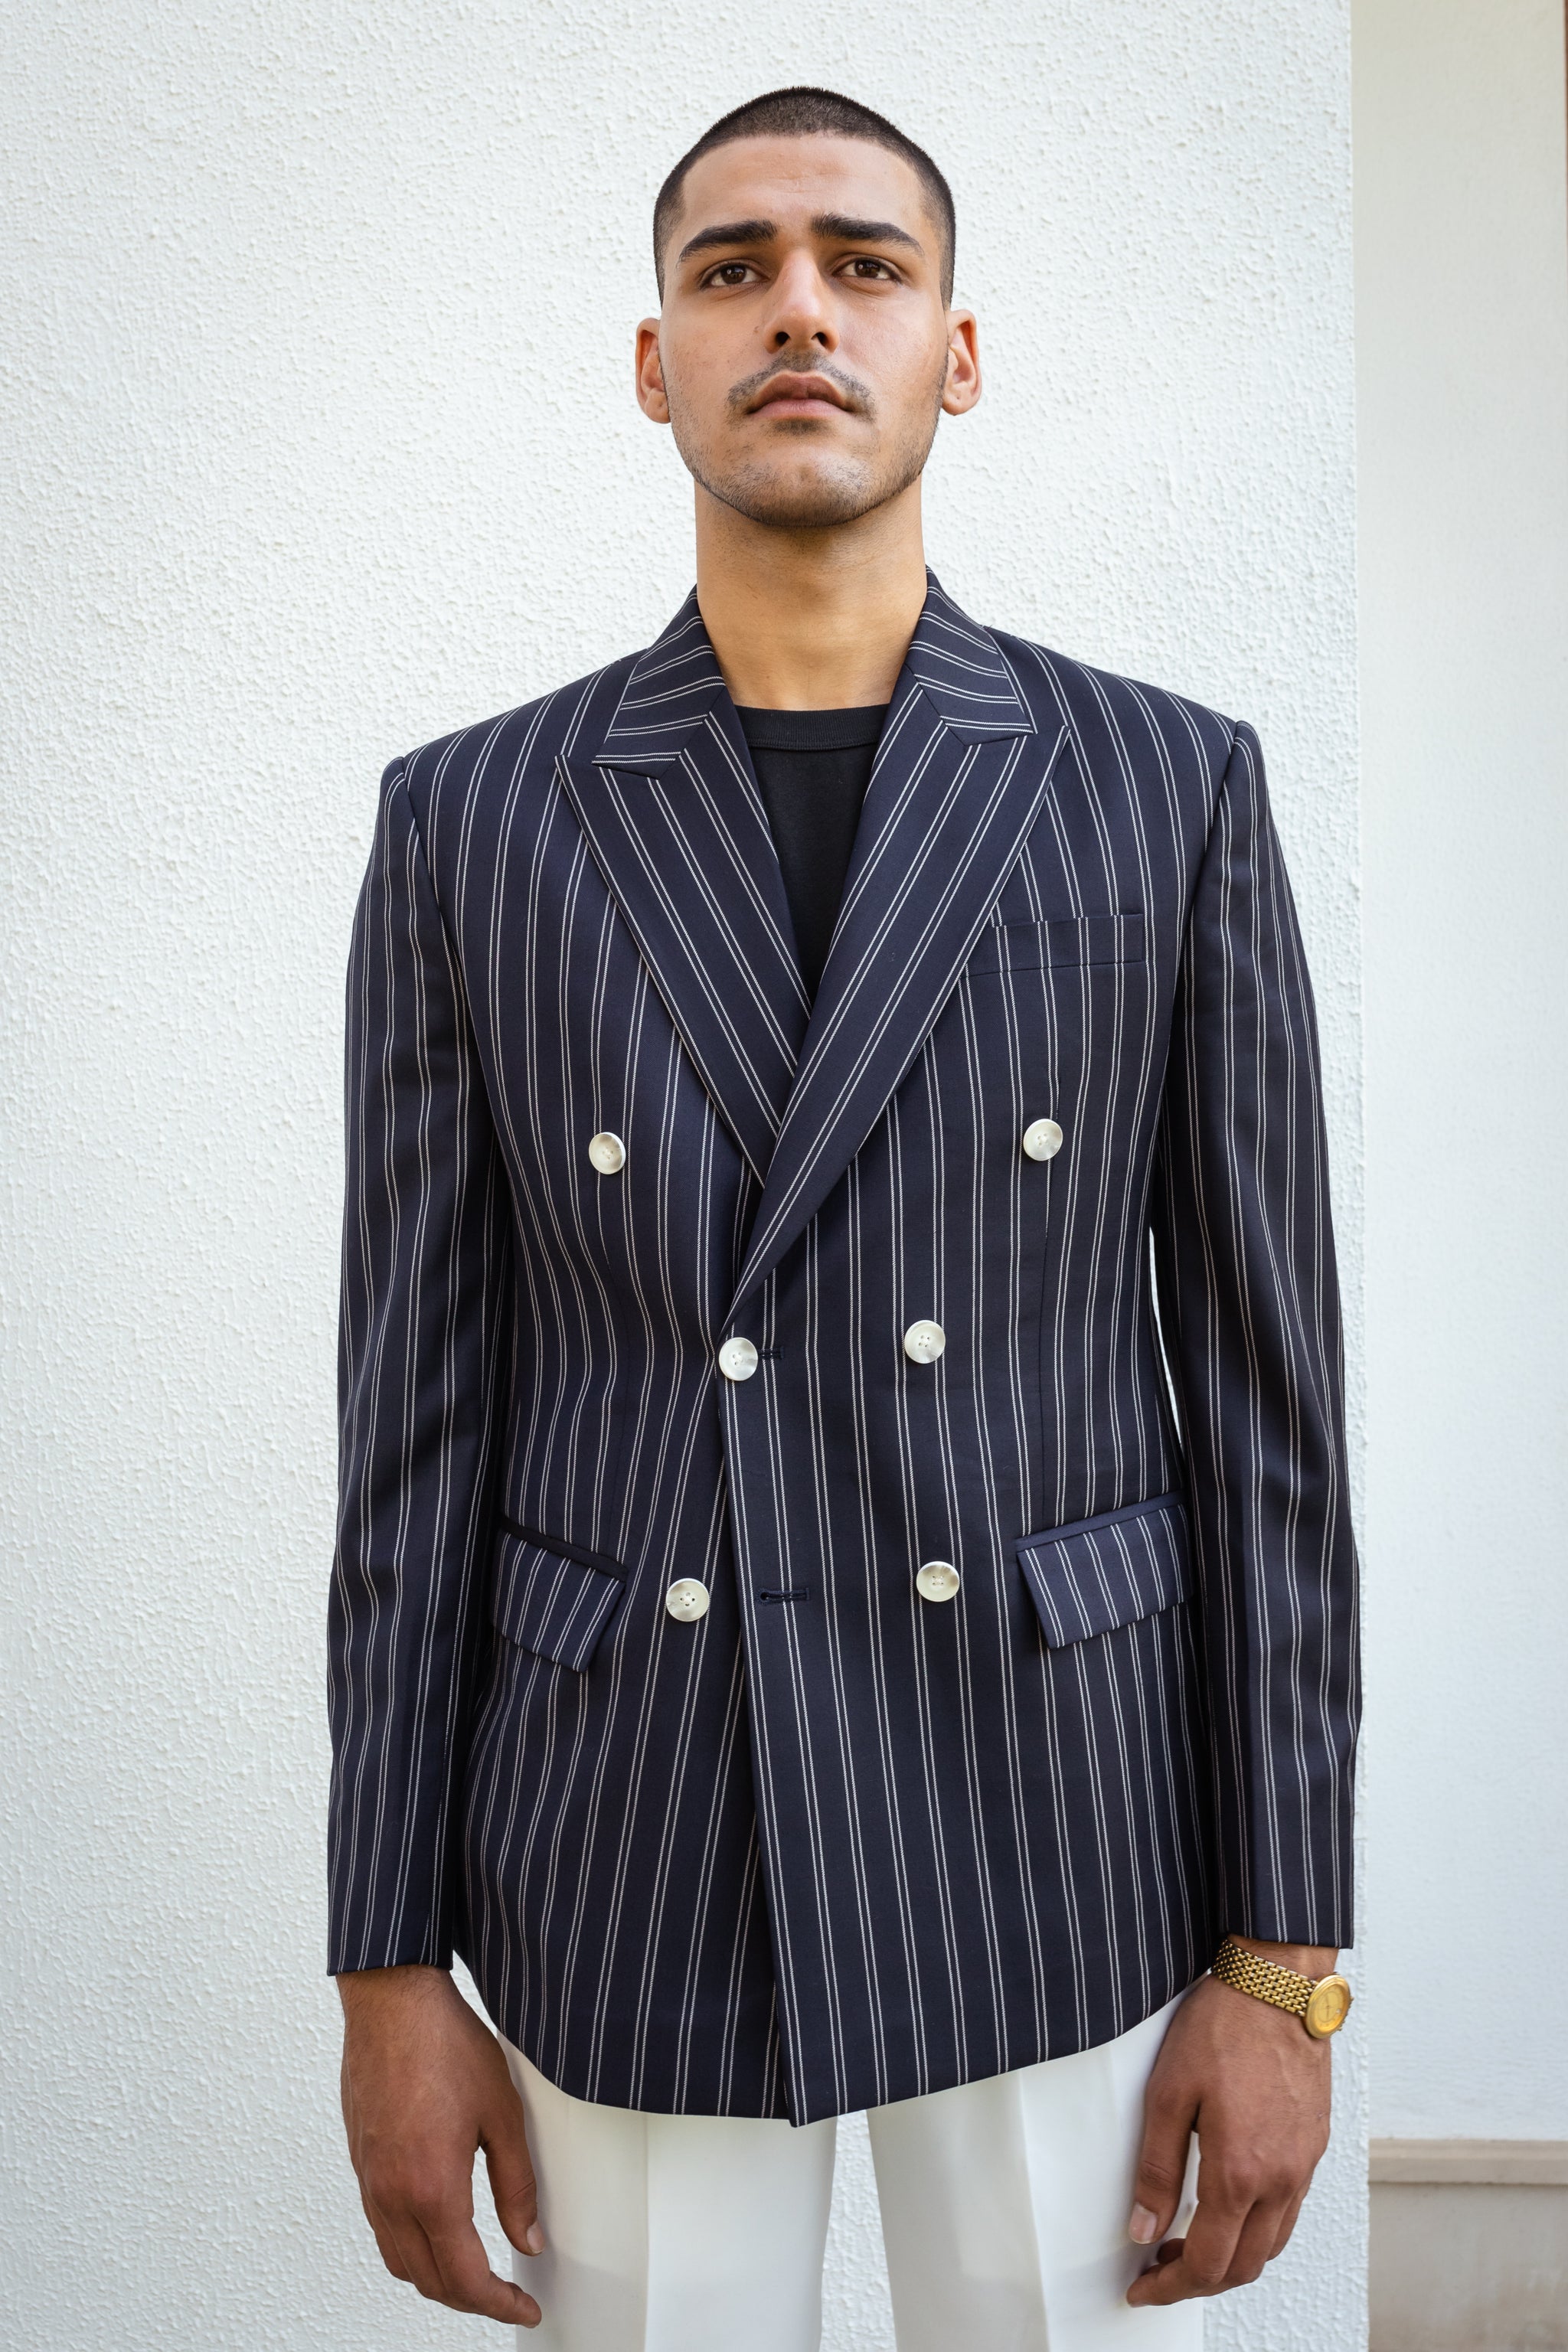 Navy Blue Double Breasted Striped Blazer.